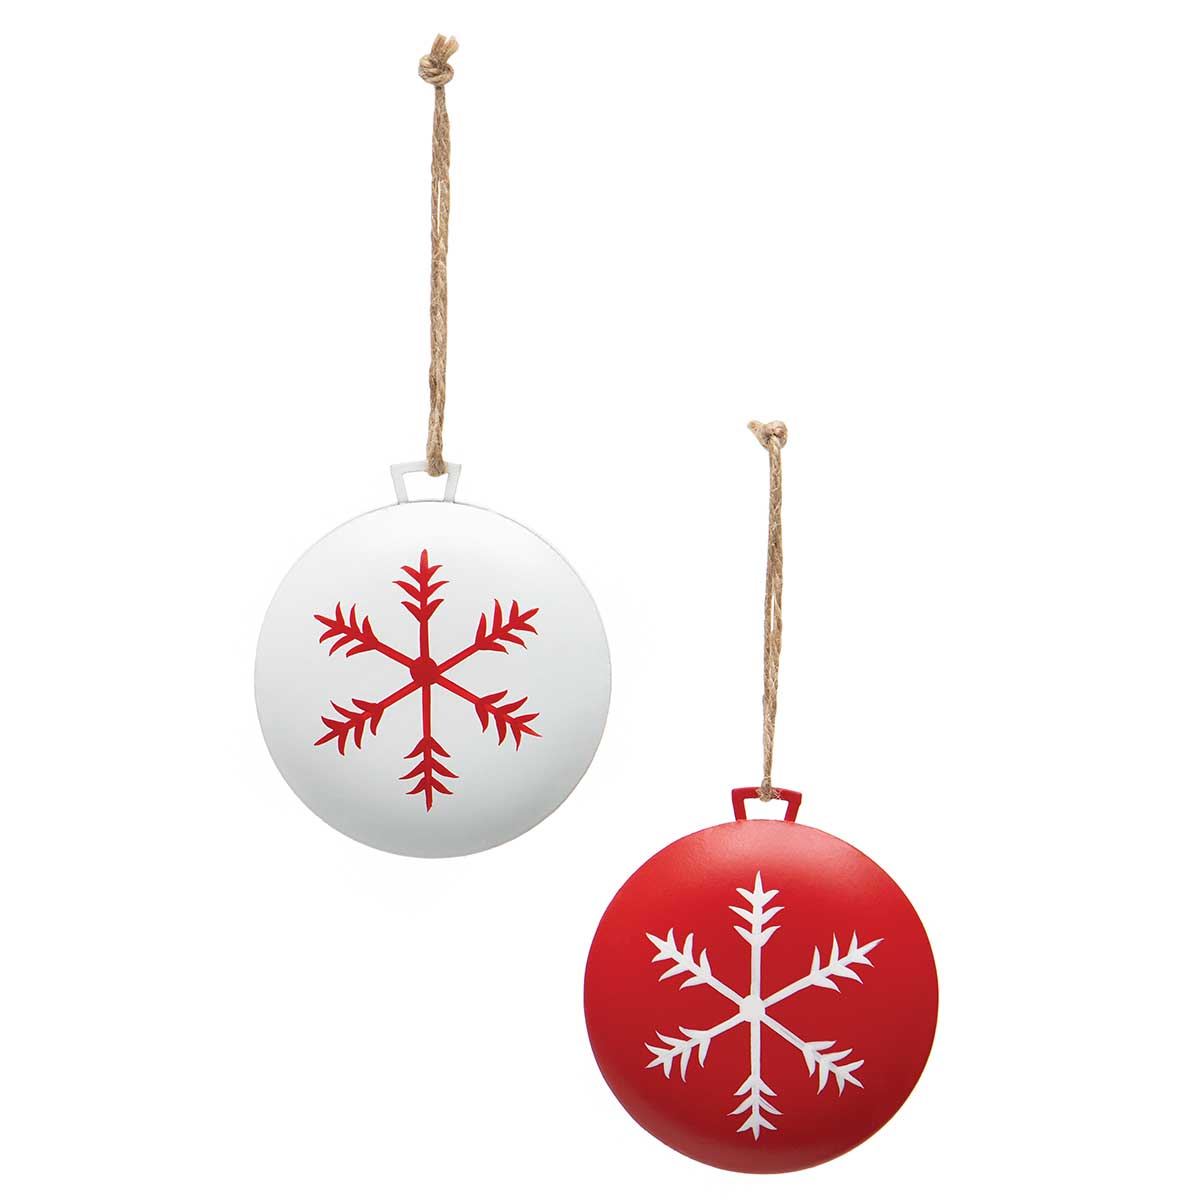 ALPINE ROUND METAL ORNAMENT WITH SNOWFLAKE AND